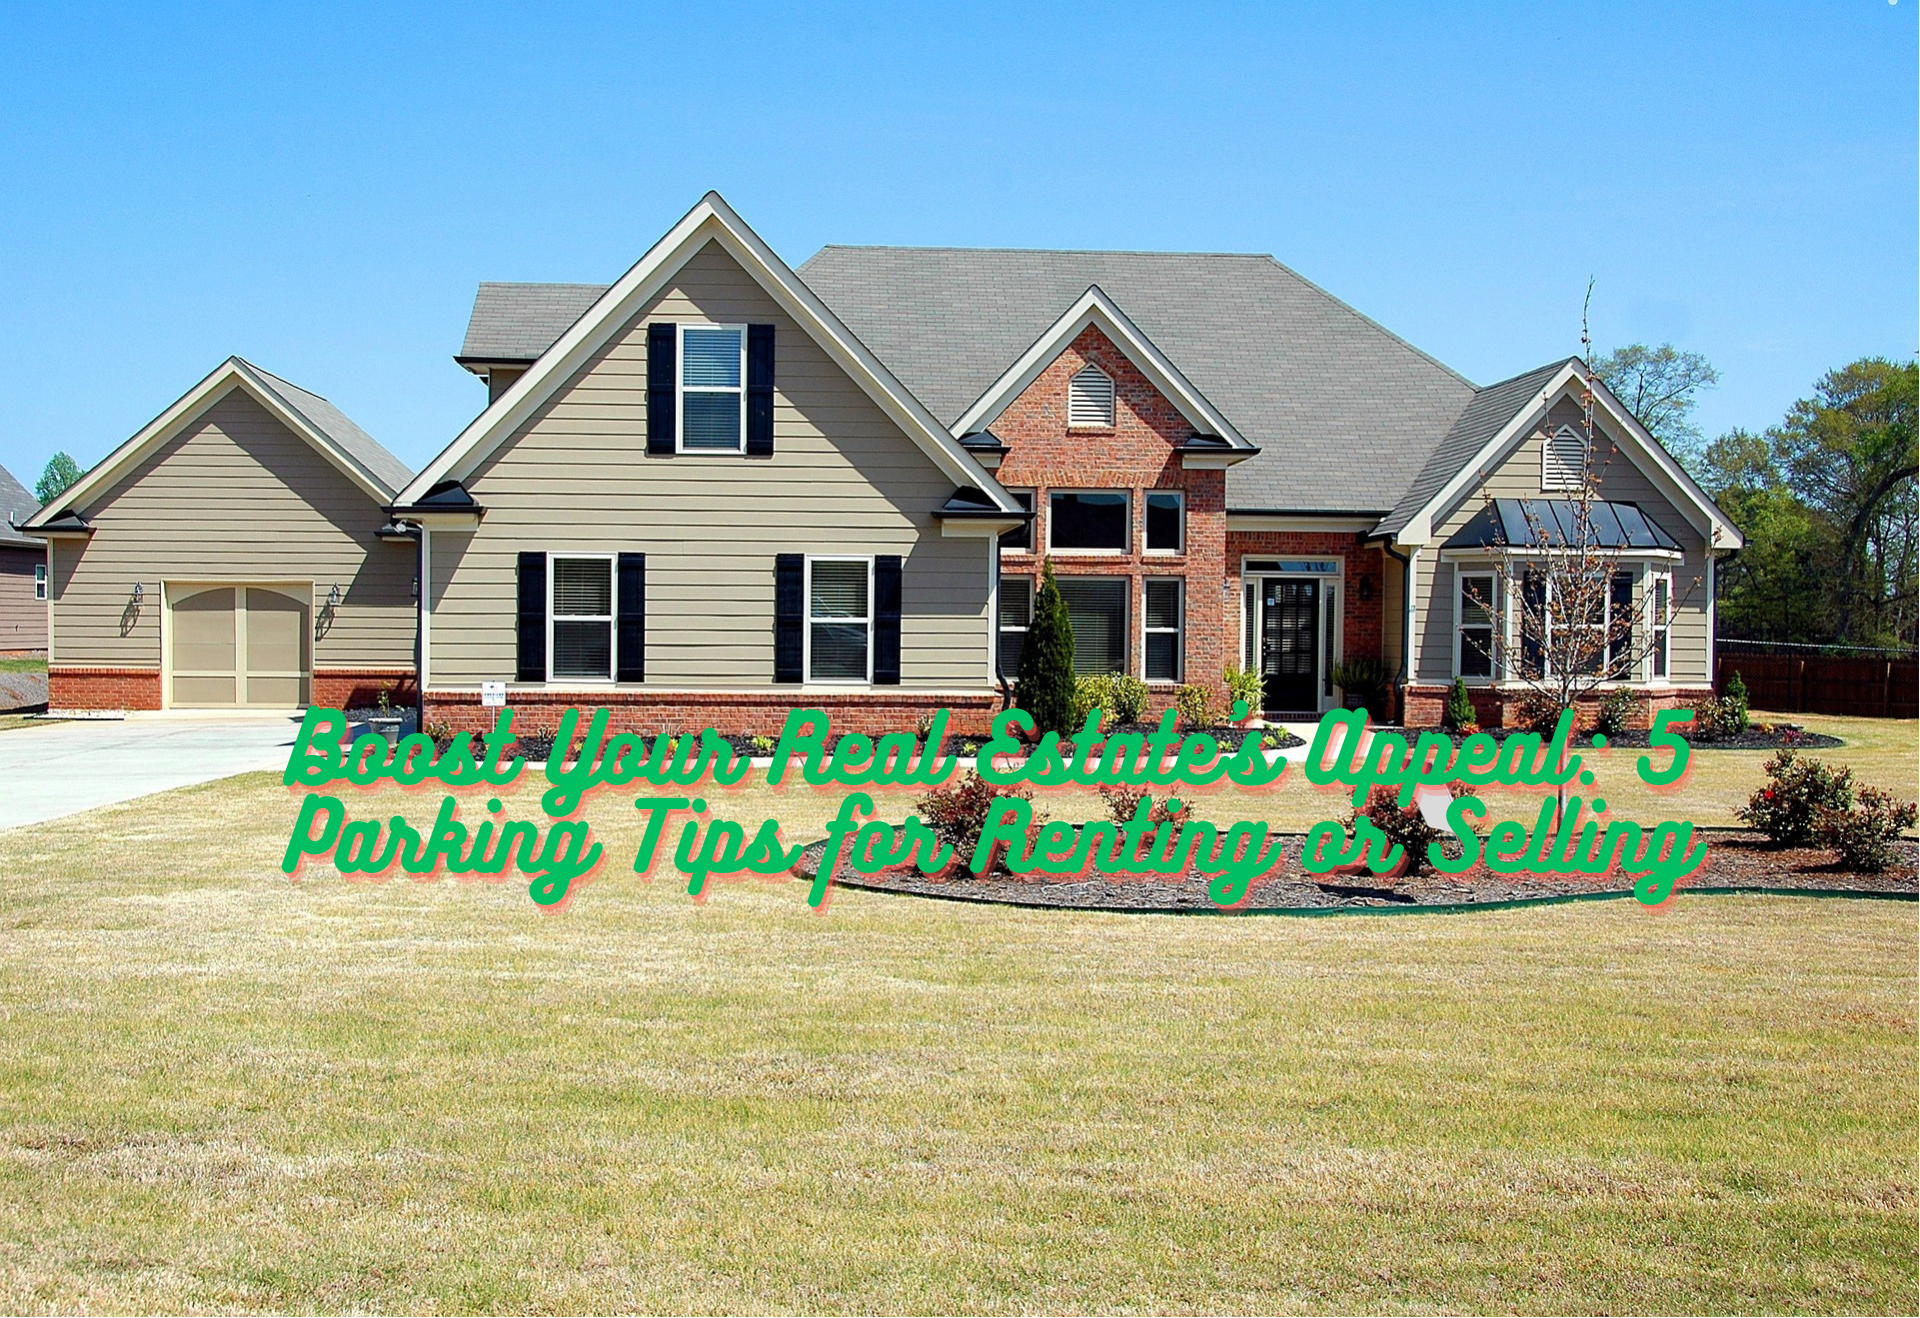 Boost Your Real Estate's Appeal 5 Parking Tips for Renting or Selling